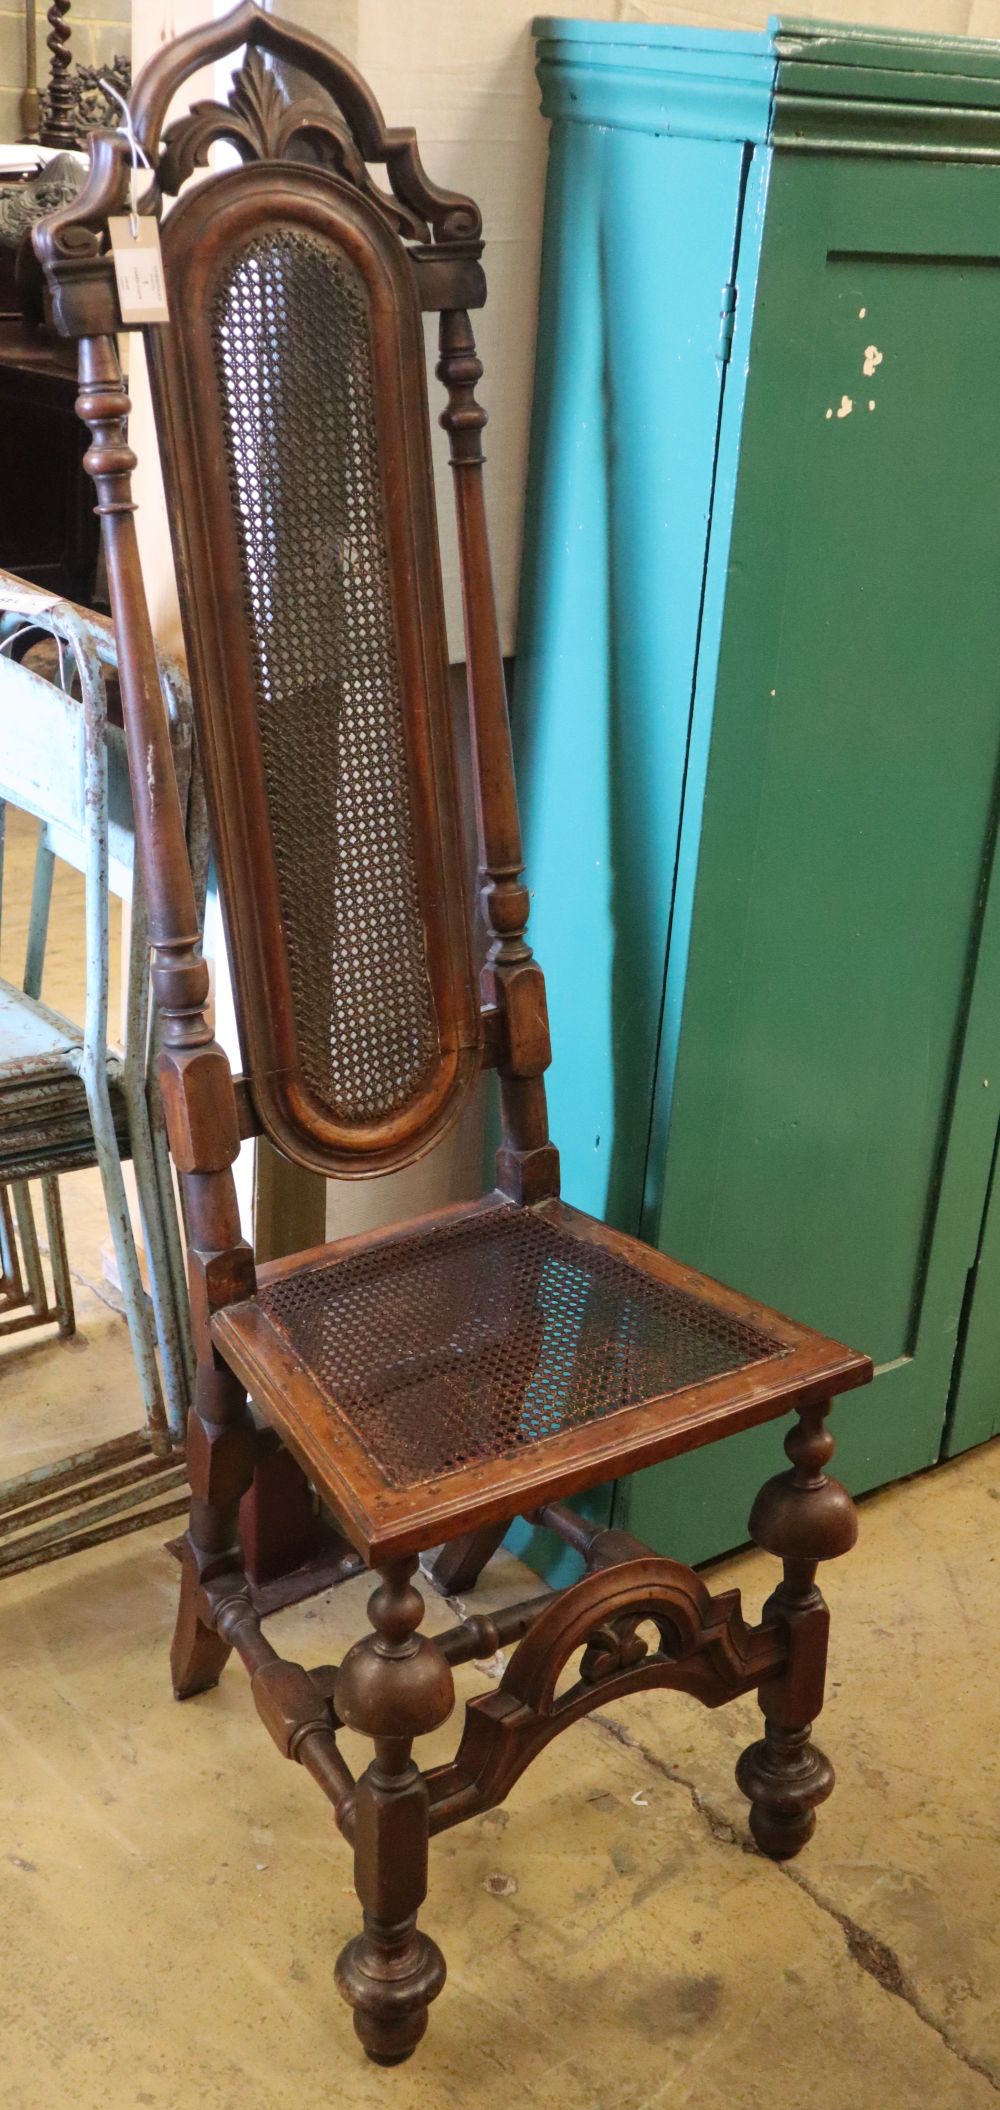 A Carolean-style carved walnut caned high back chair